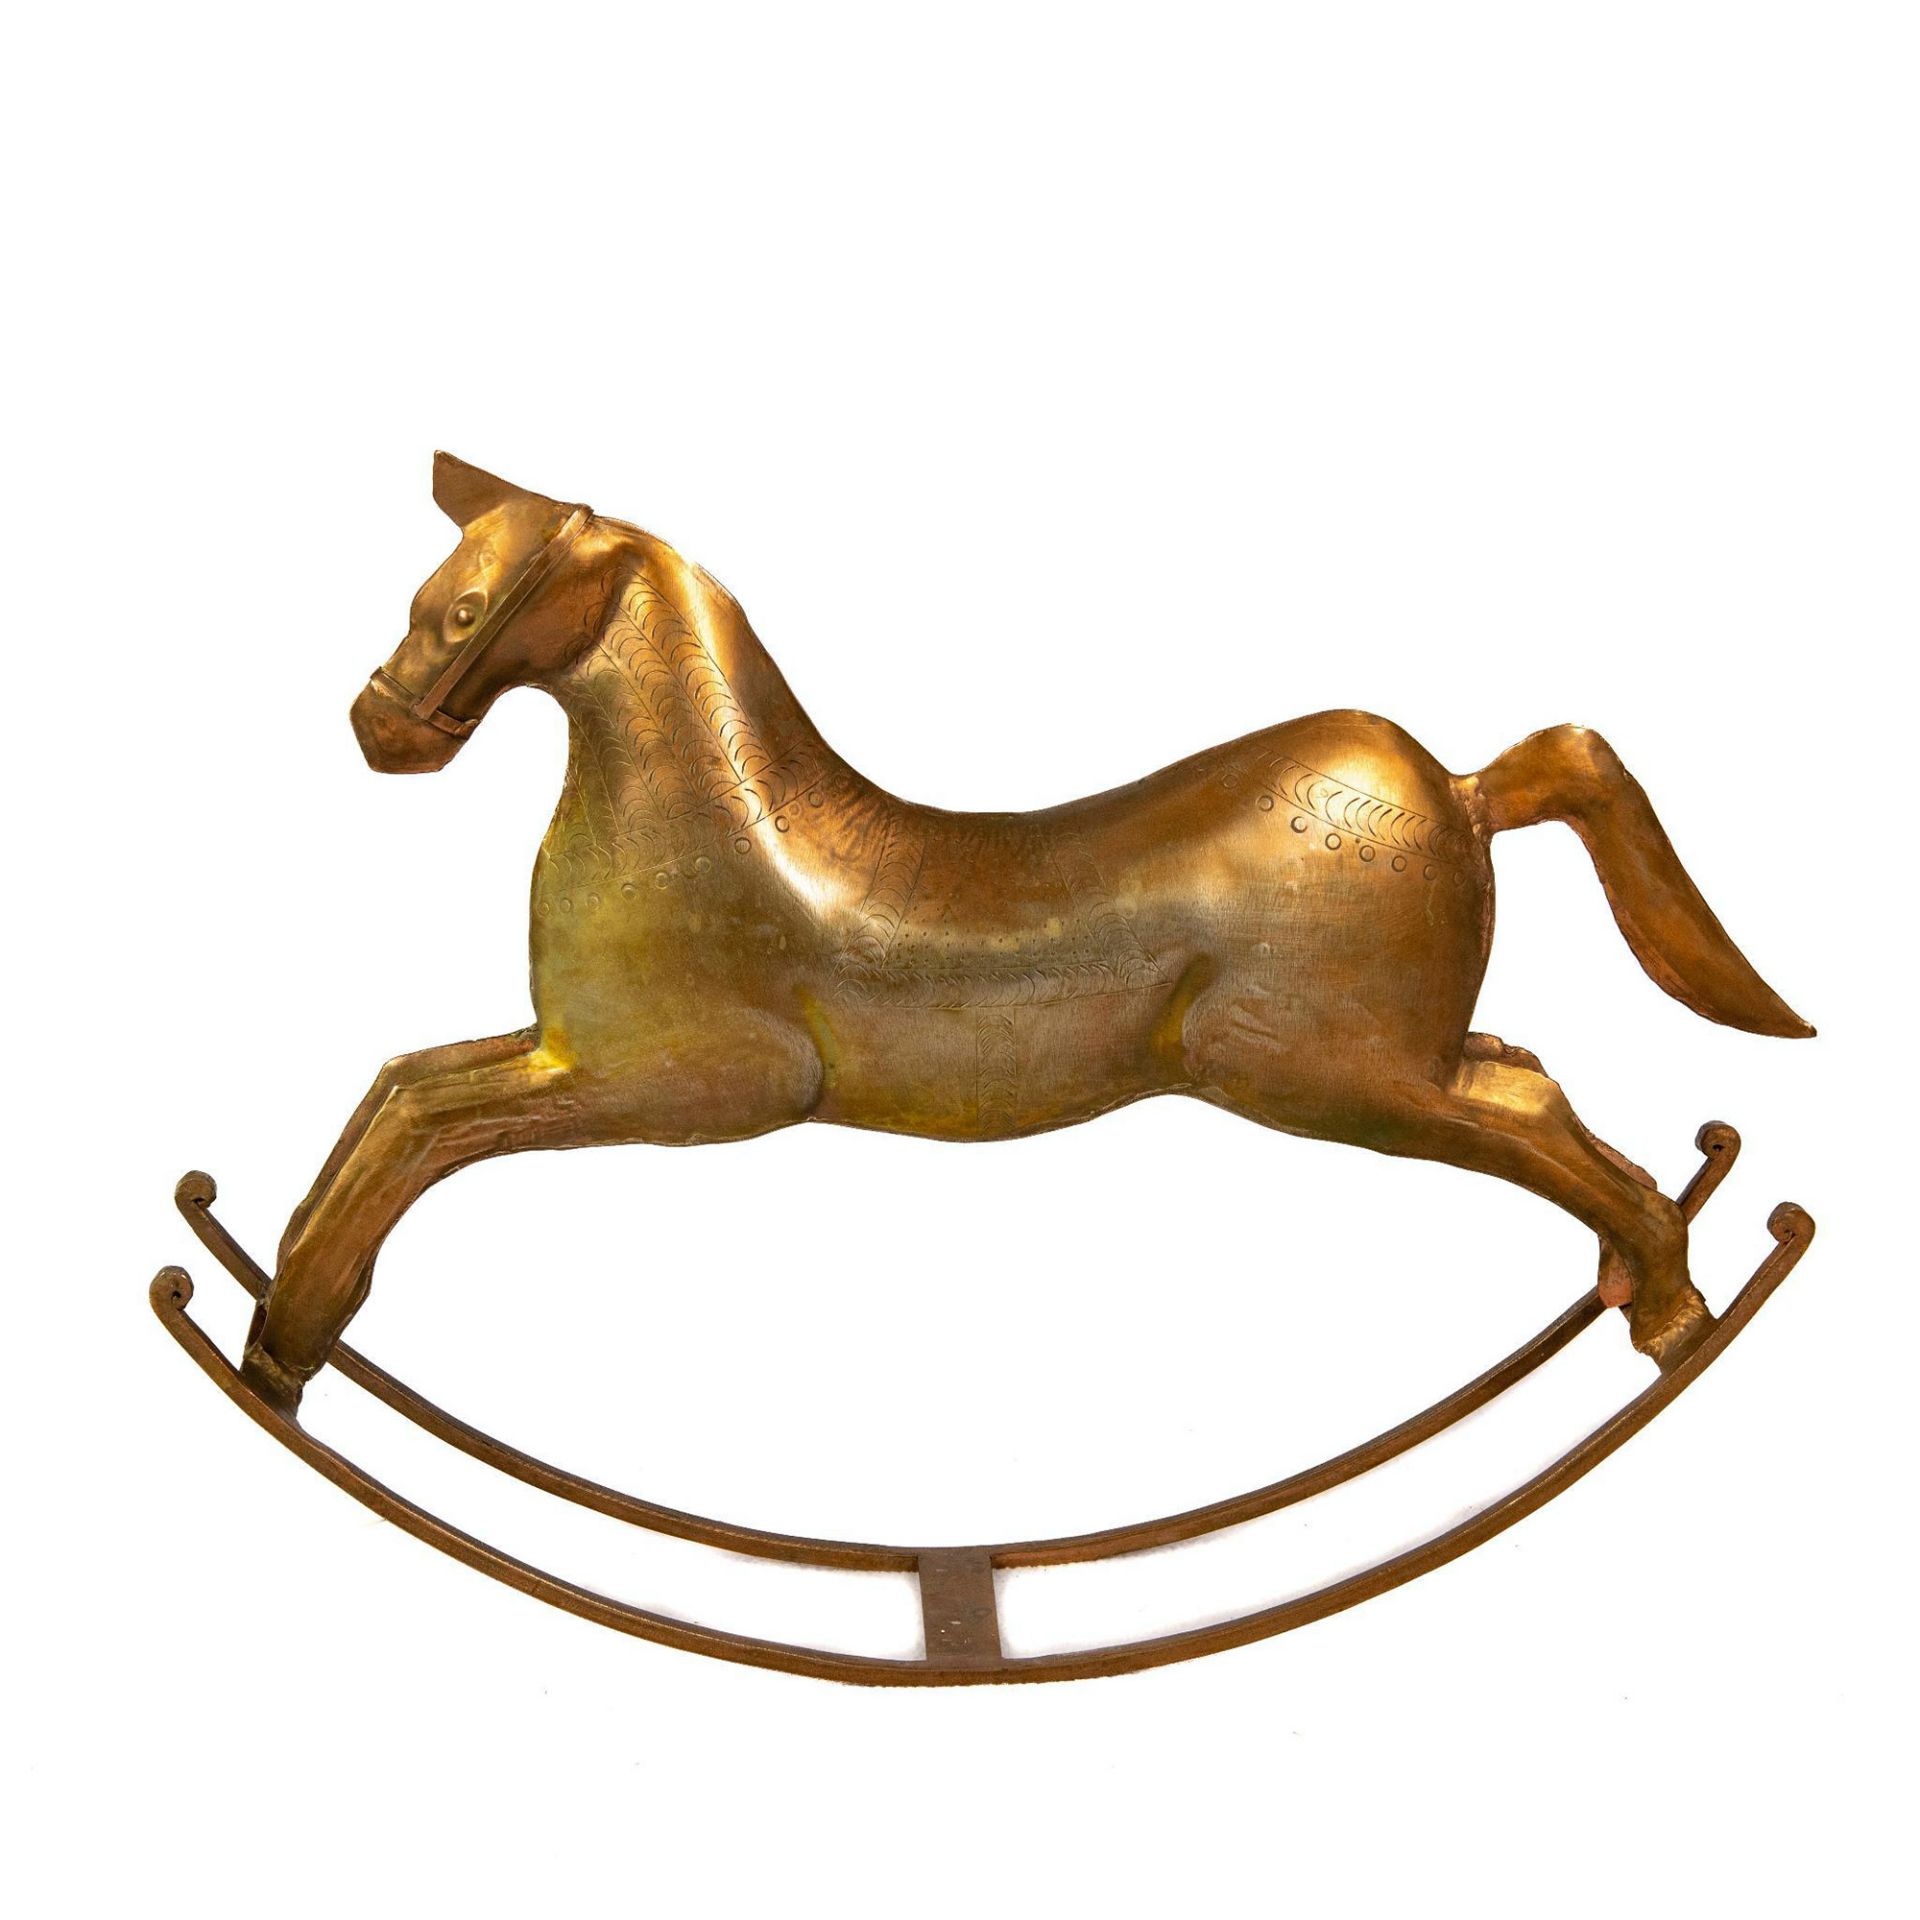 Decorative Copper Hand-Crafted Rocking Horse - Image 2 of 4